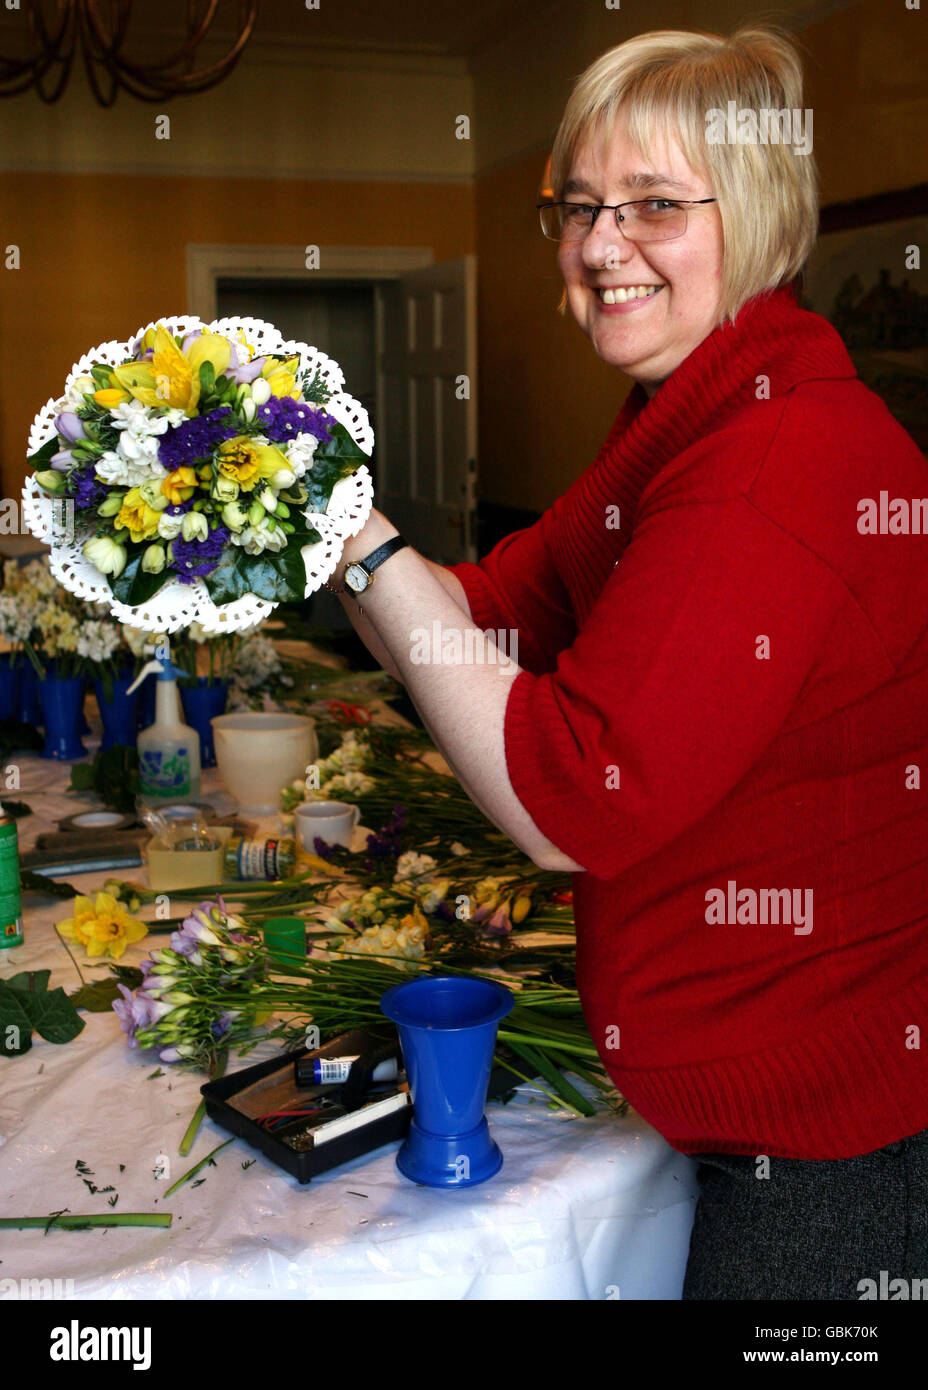 Rosie Mason, 55, the Royal Nosegay maker prepares the Queen's Nosegays at the Angel Hotel in Bury St Edmunds. The posies will be carried by the Royals during the Maundy Thursday Service at Bury St Edmunds Cathedral when Queen Elizabeth II will hand out Maundy coins. Stock Photo